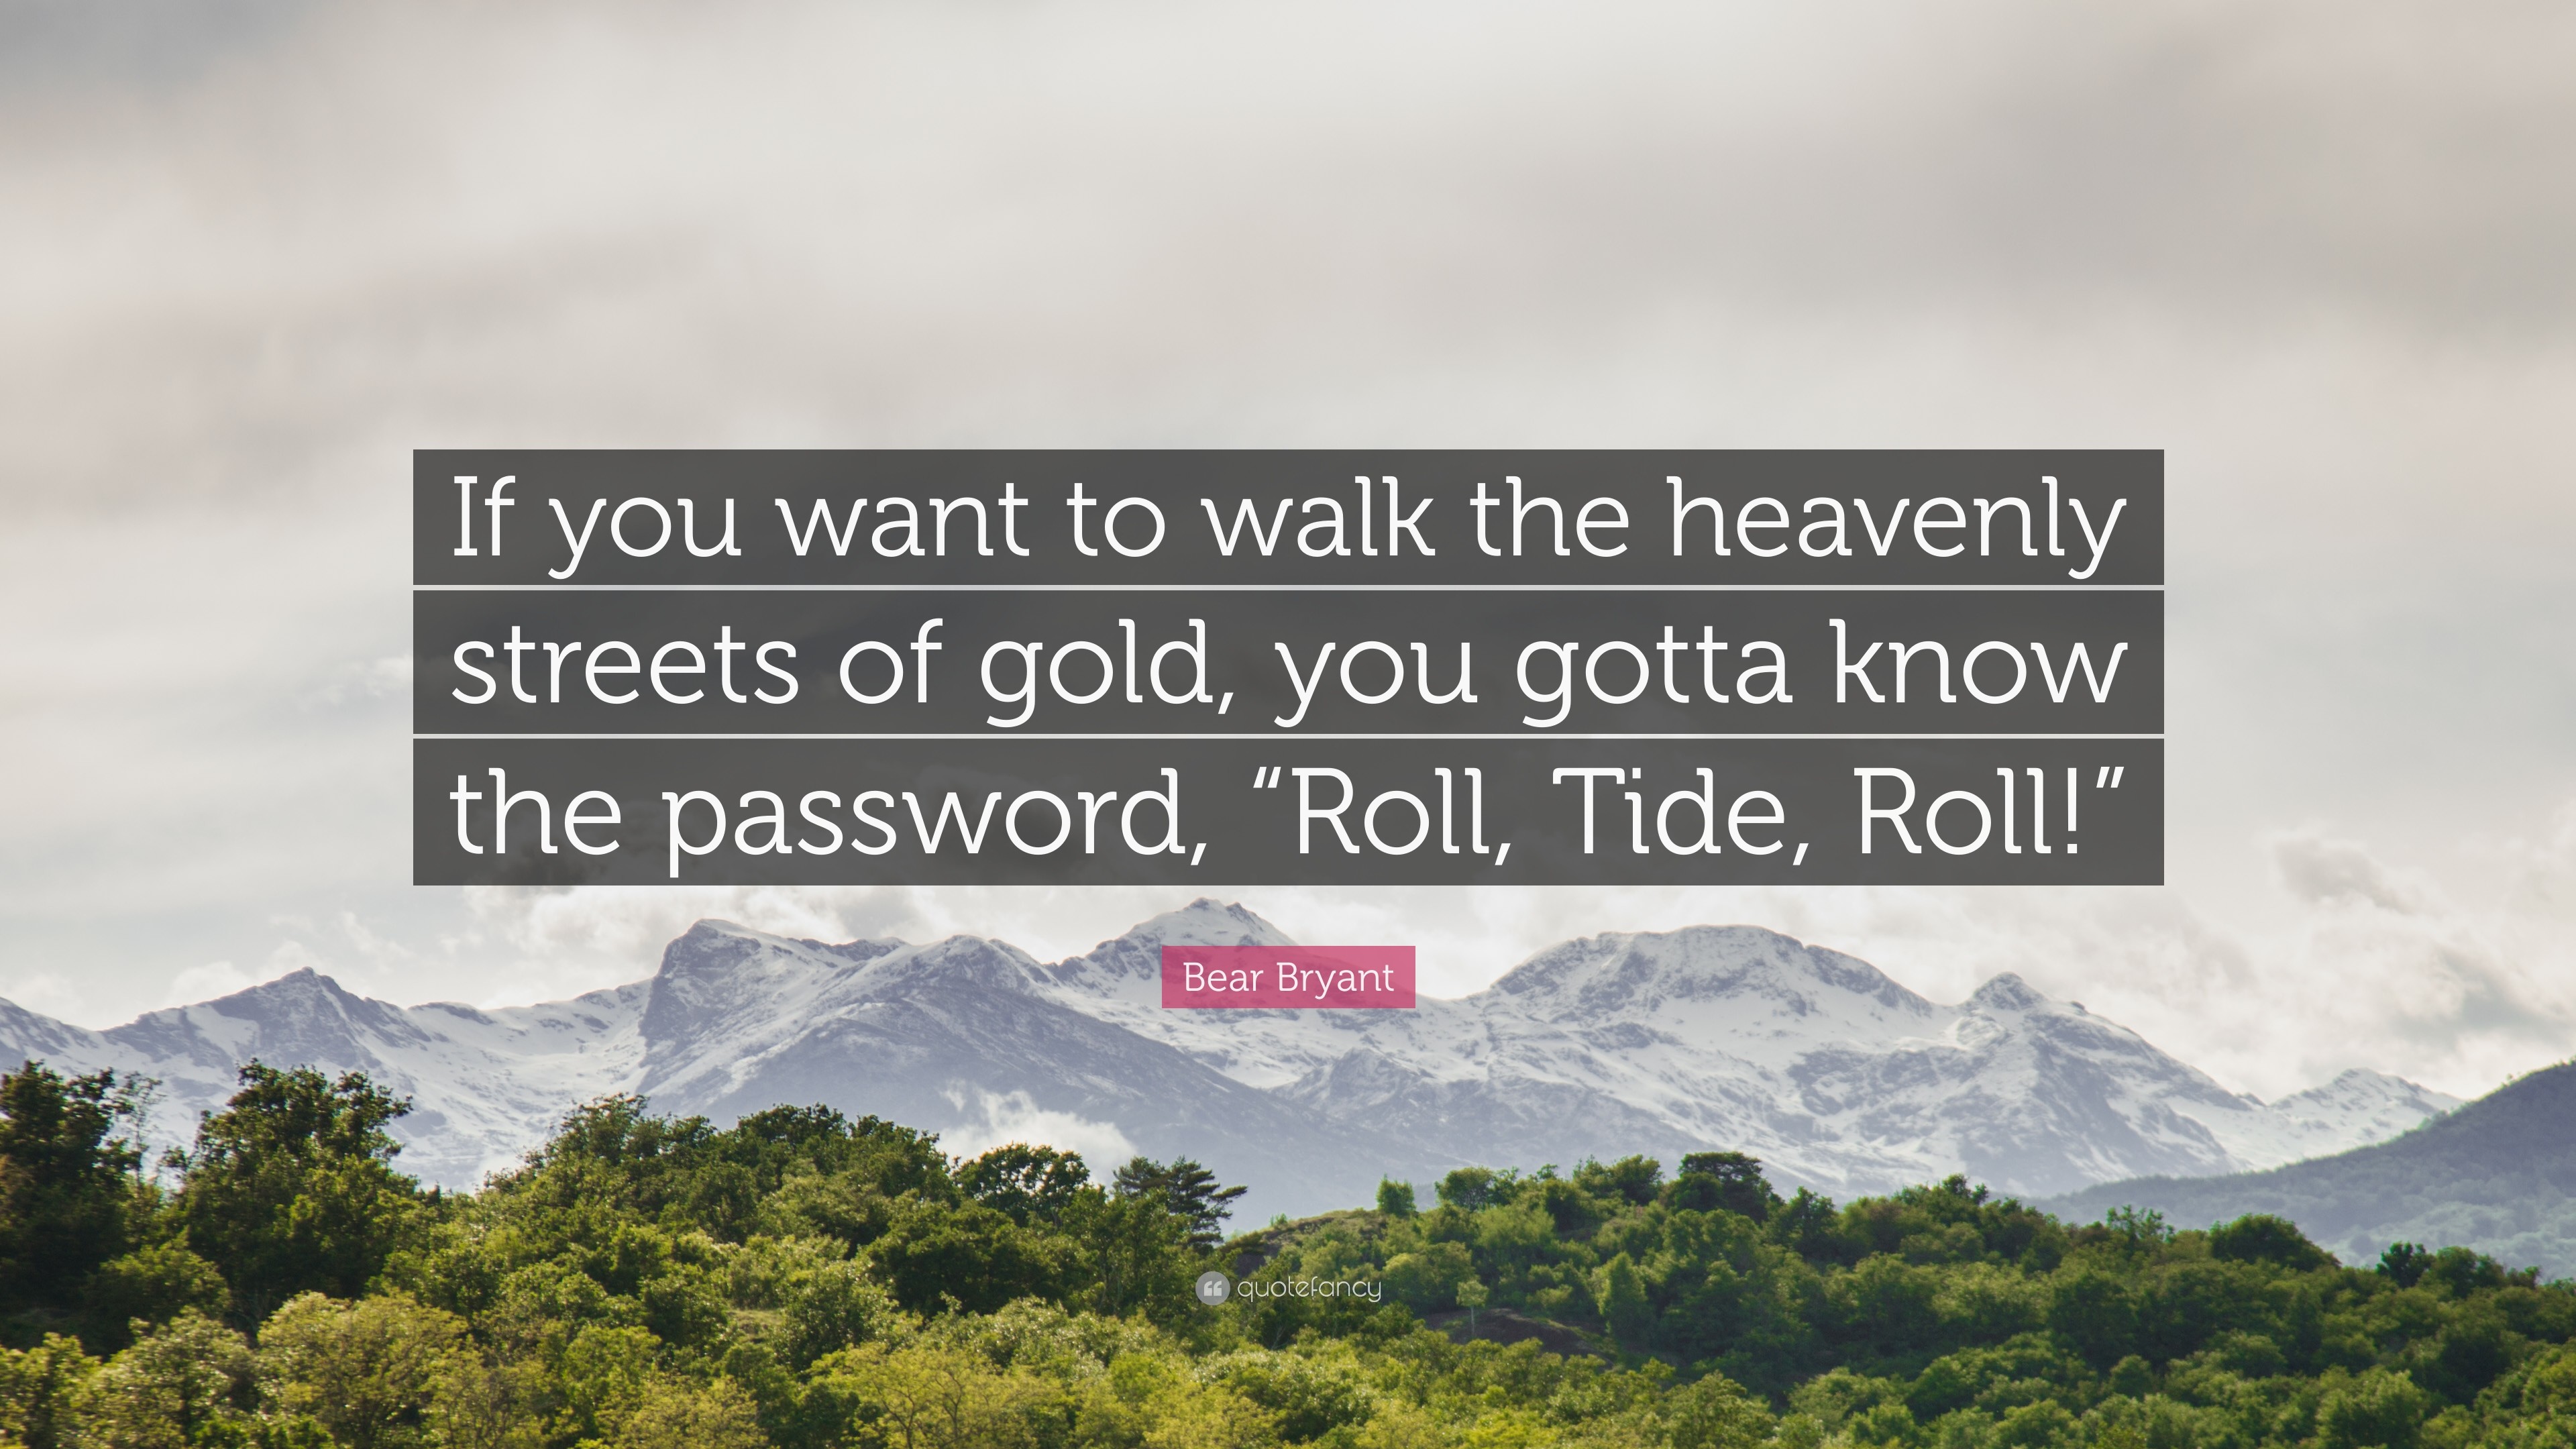 3840x2160 Bear Bryant Quote: “If you want to walk the heavenly streets of gold,